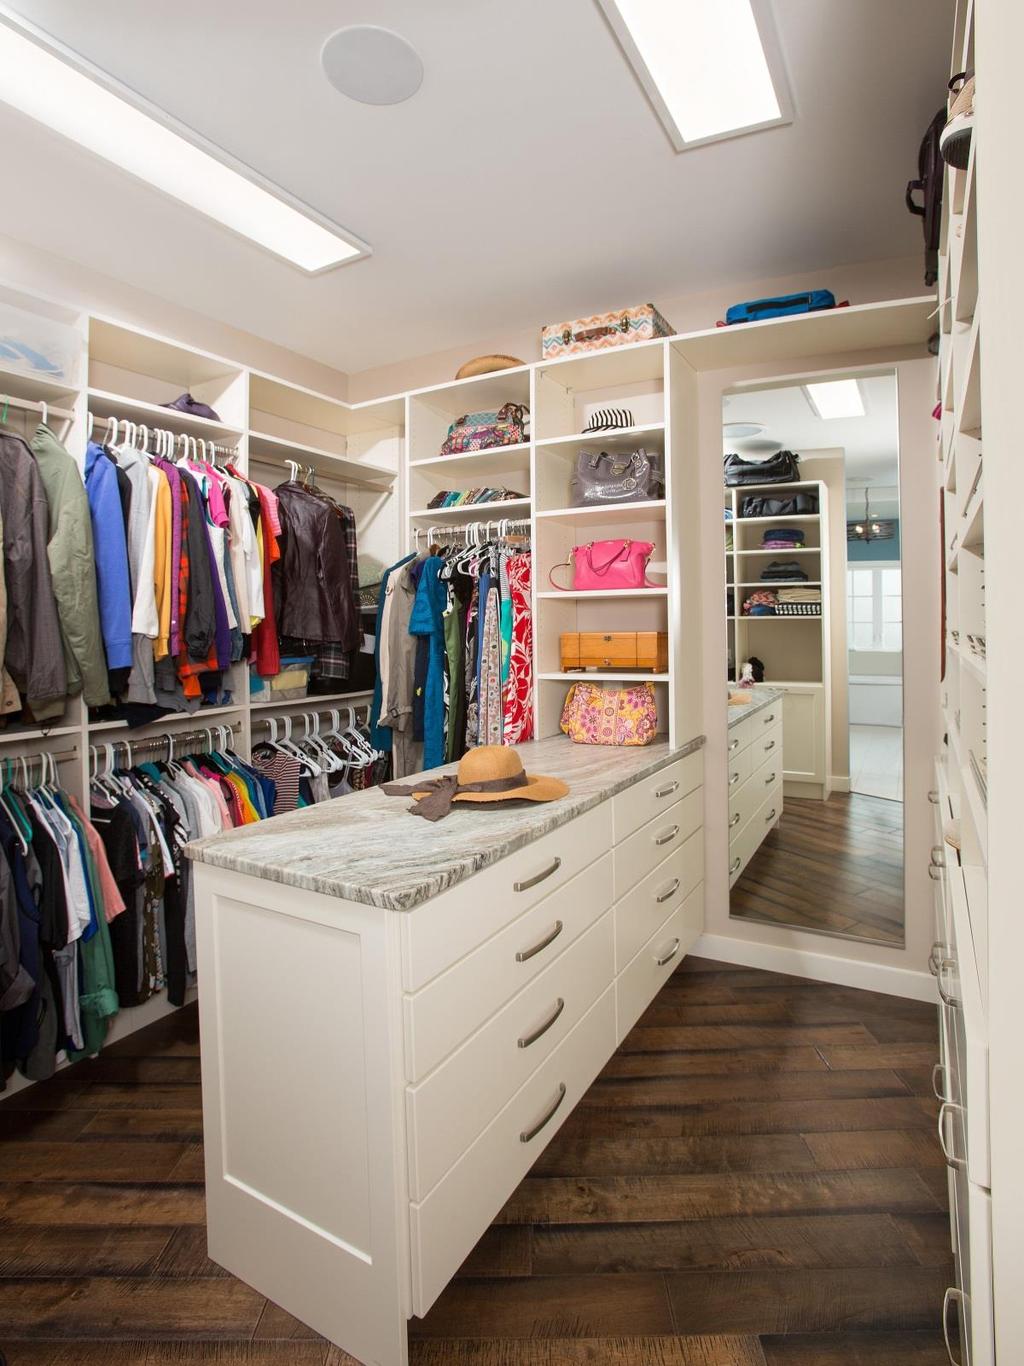 An organized his and her master closet was essential for our clients. The shelves along the perimeter and the drawers on the center were custombuilt.